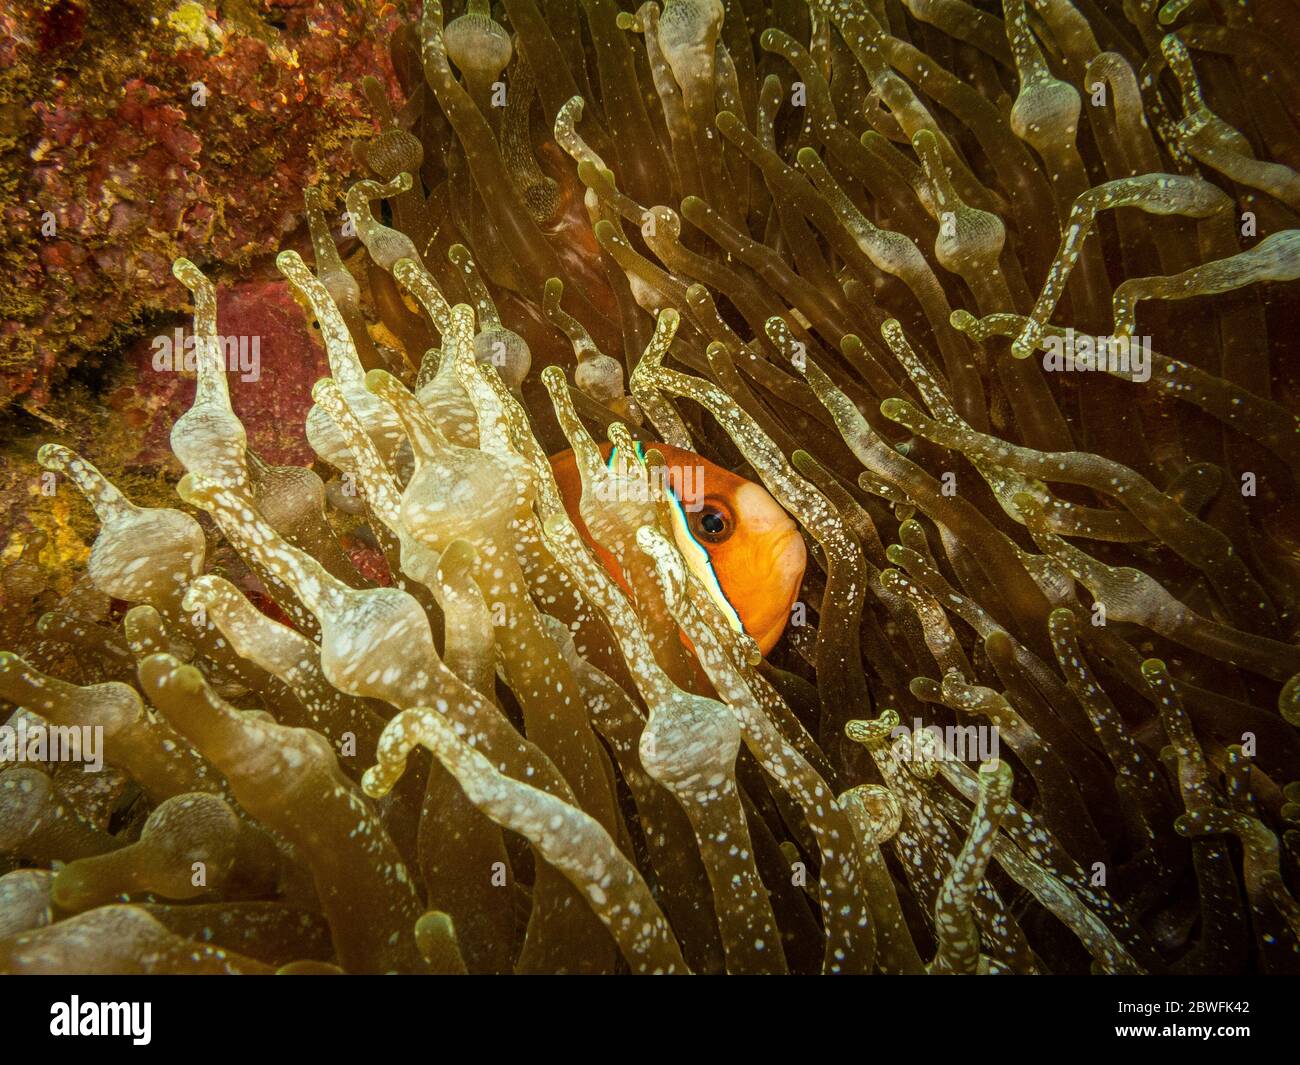 Amphiprion clarkii or Clark's anemonefish (also called yellowtail clownfish) peeking out from it's home in a stinging sea anemone Stock Photo